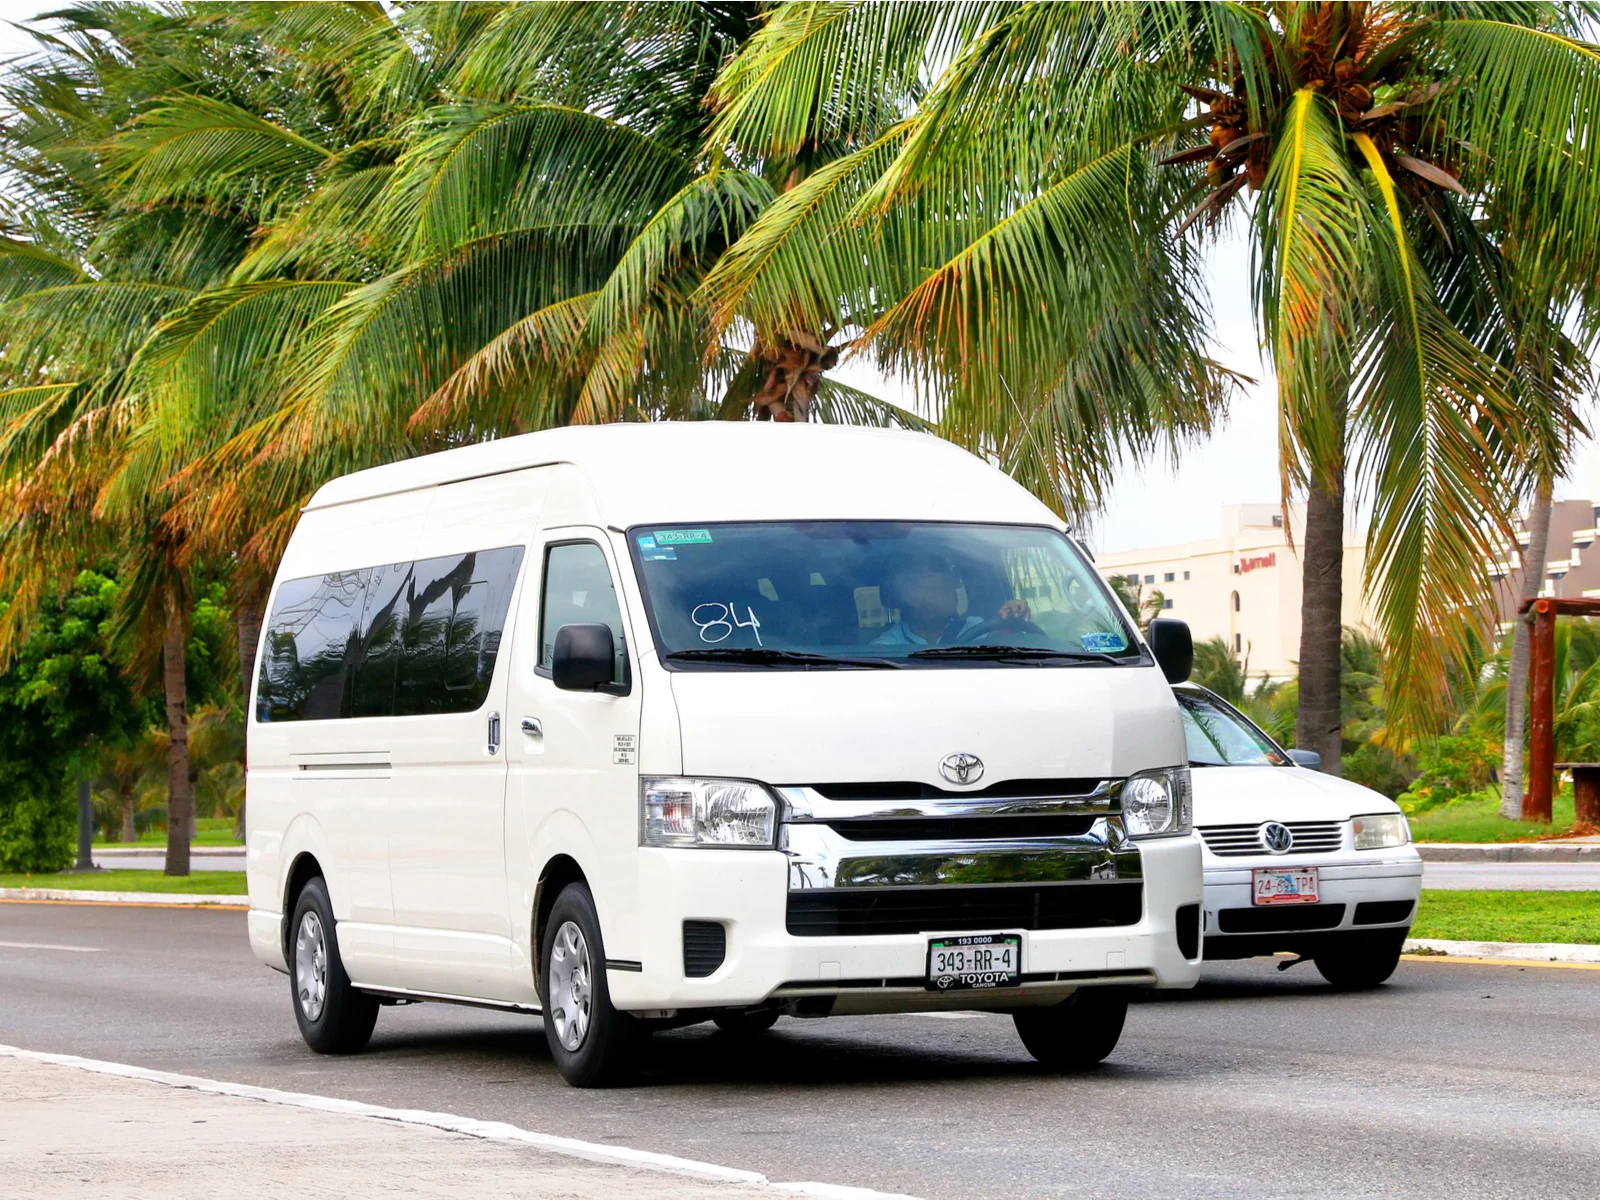 Photo of a taxi van under a palm tree for a roundup of the best hotels in Tulum